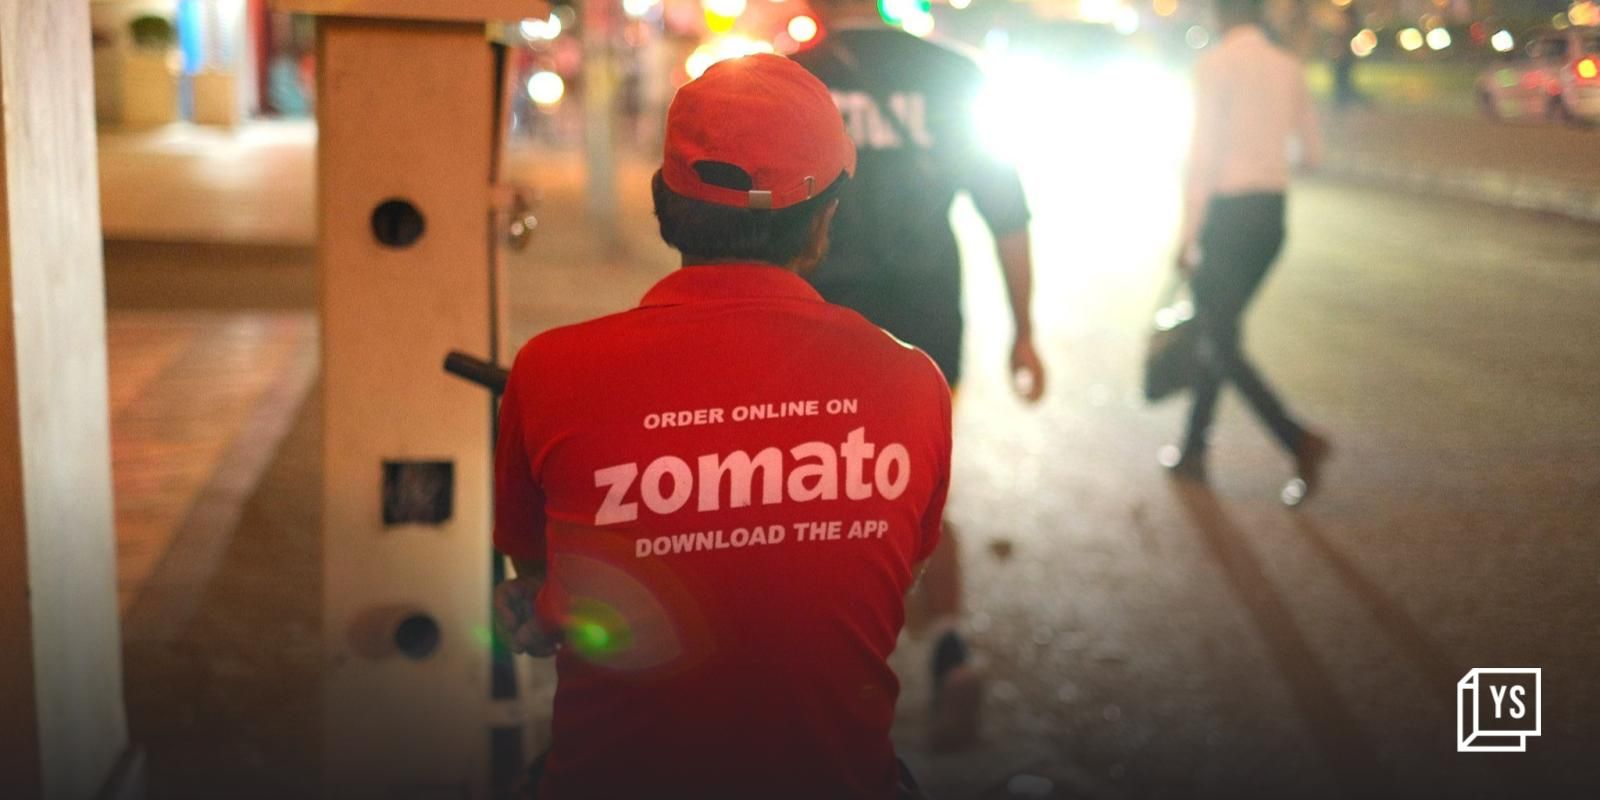 Green shoots are back: Zomato strikes gold in Q2
